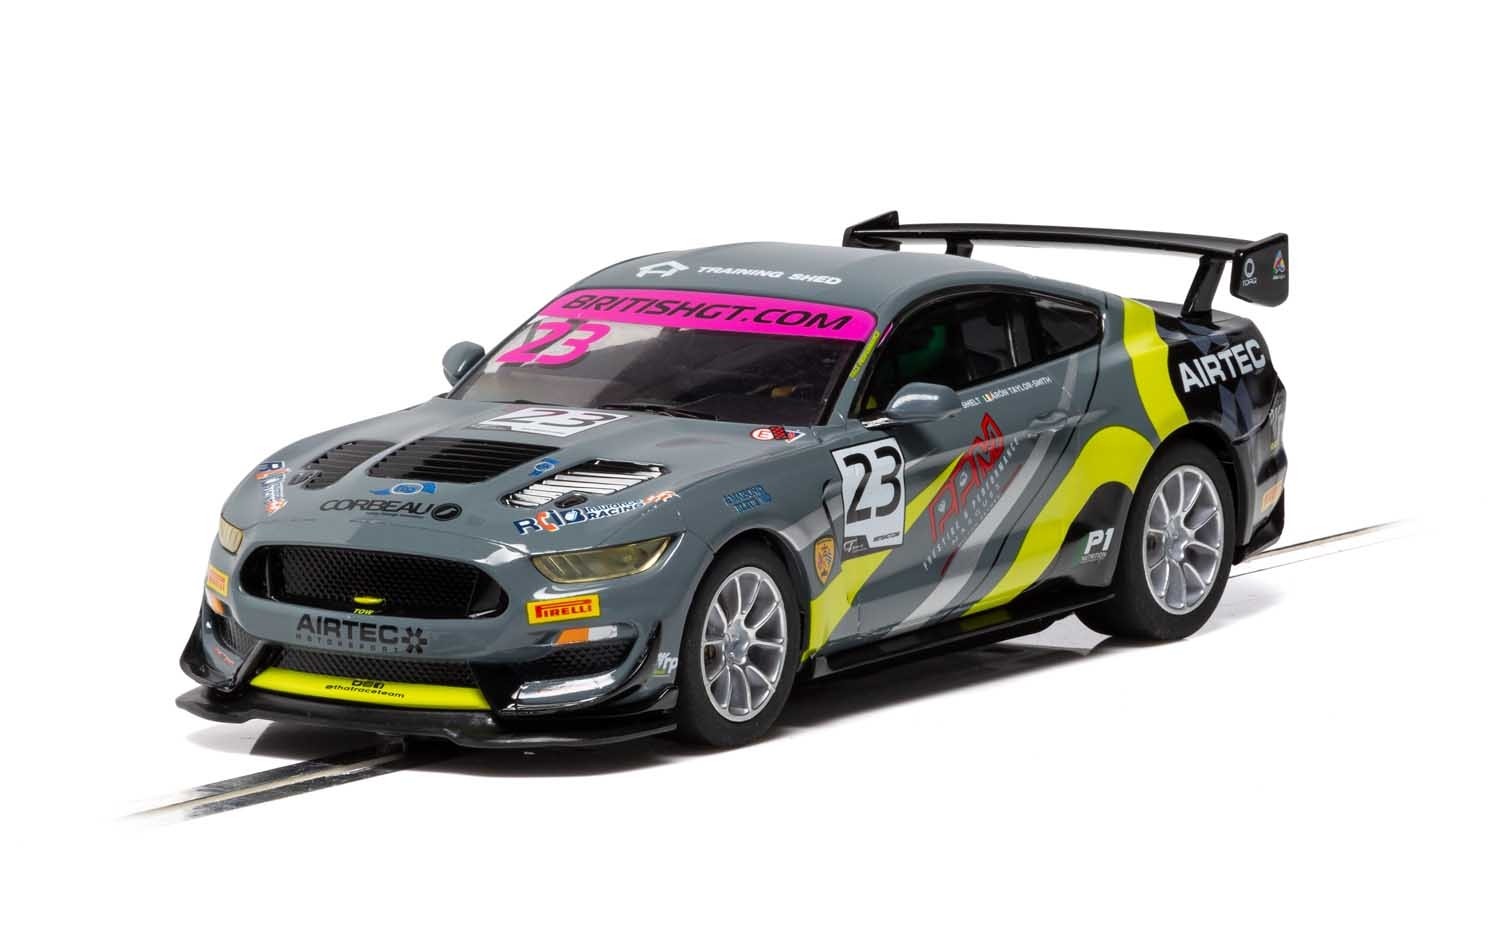 C4182 Ford Mustang GT4 "Airtec" British GT 2019